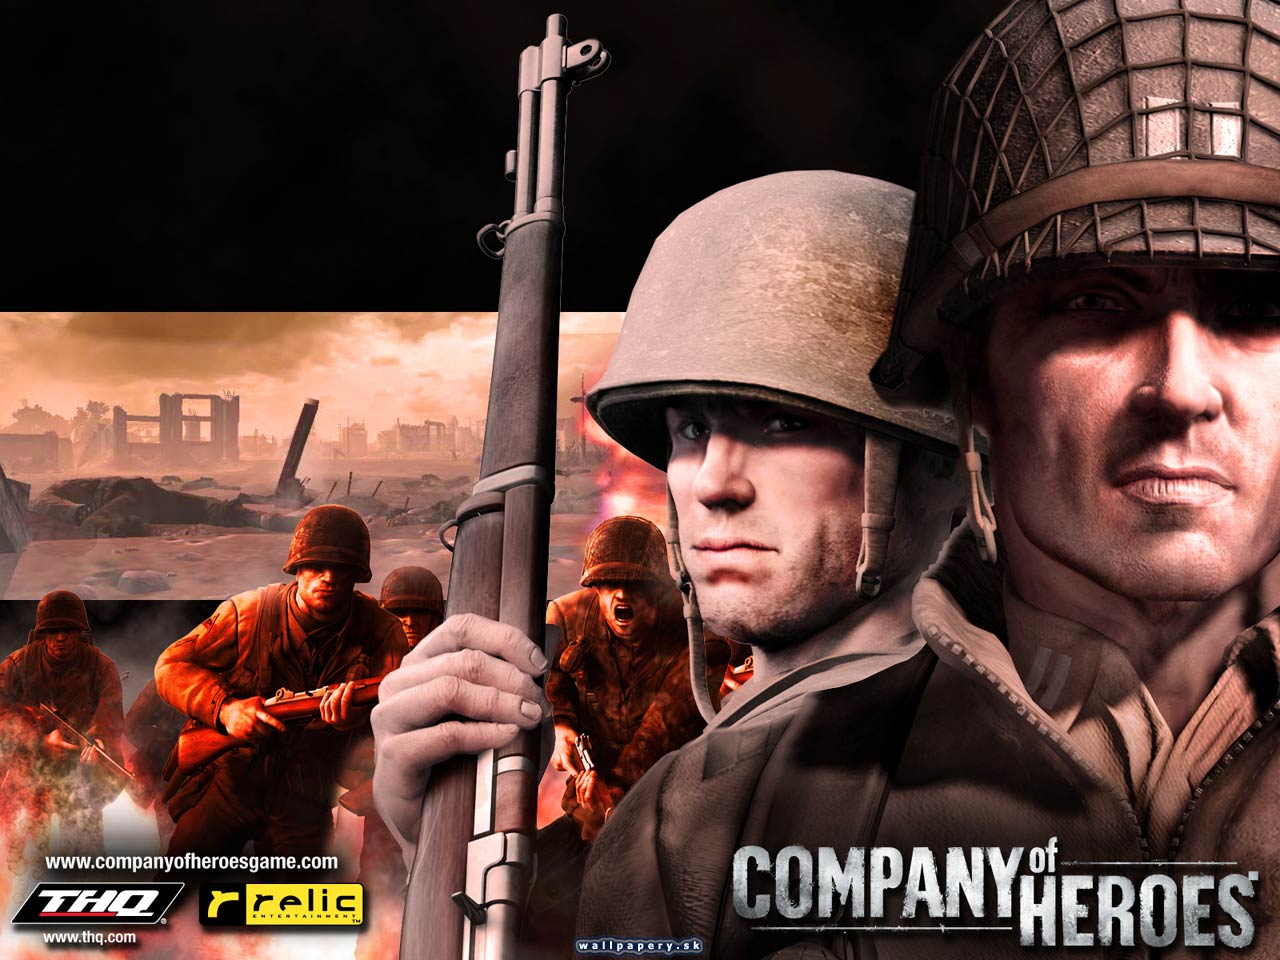 Company of Heroes - wallpaper 3